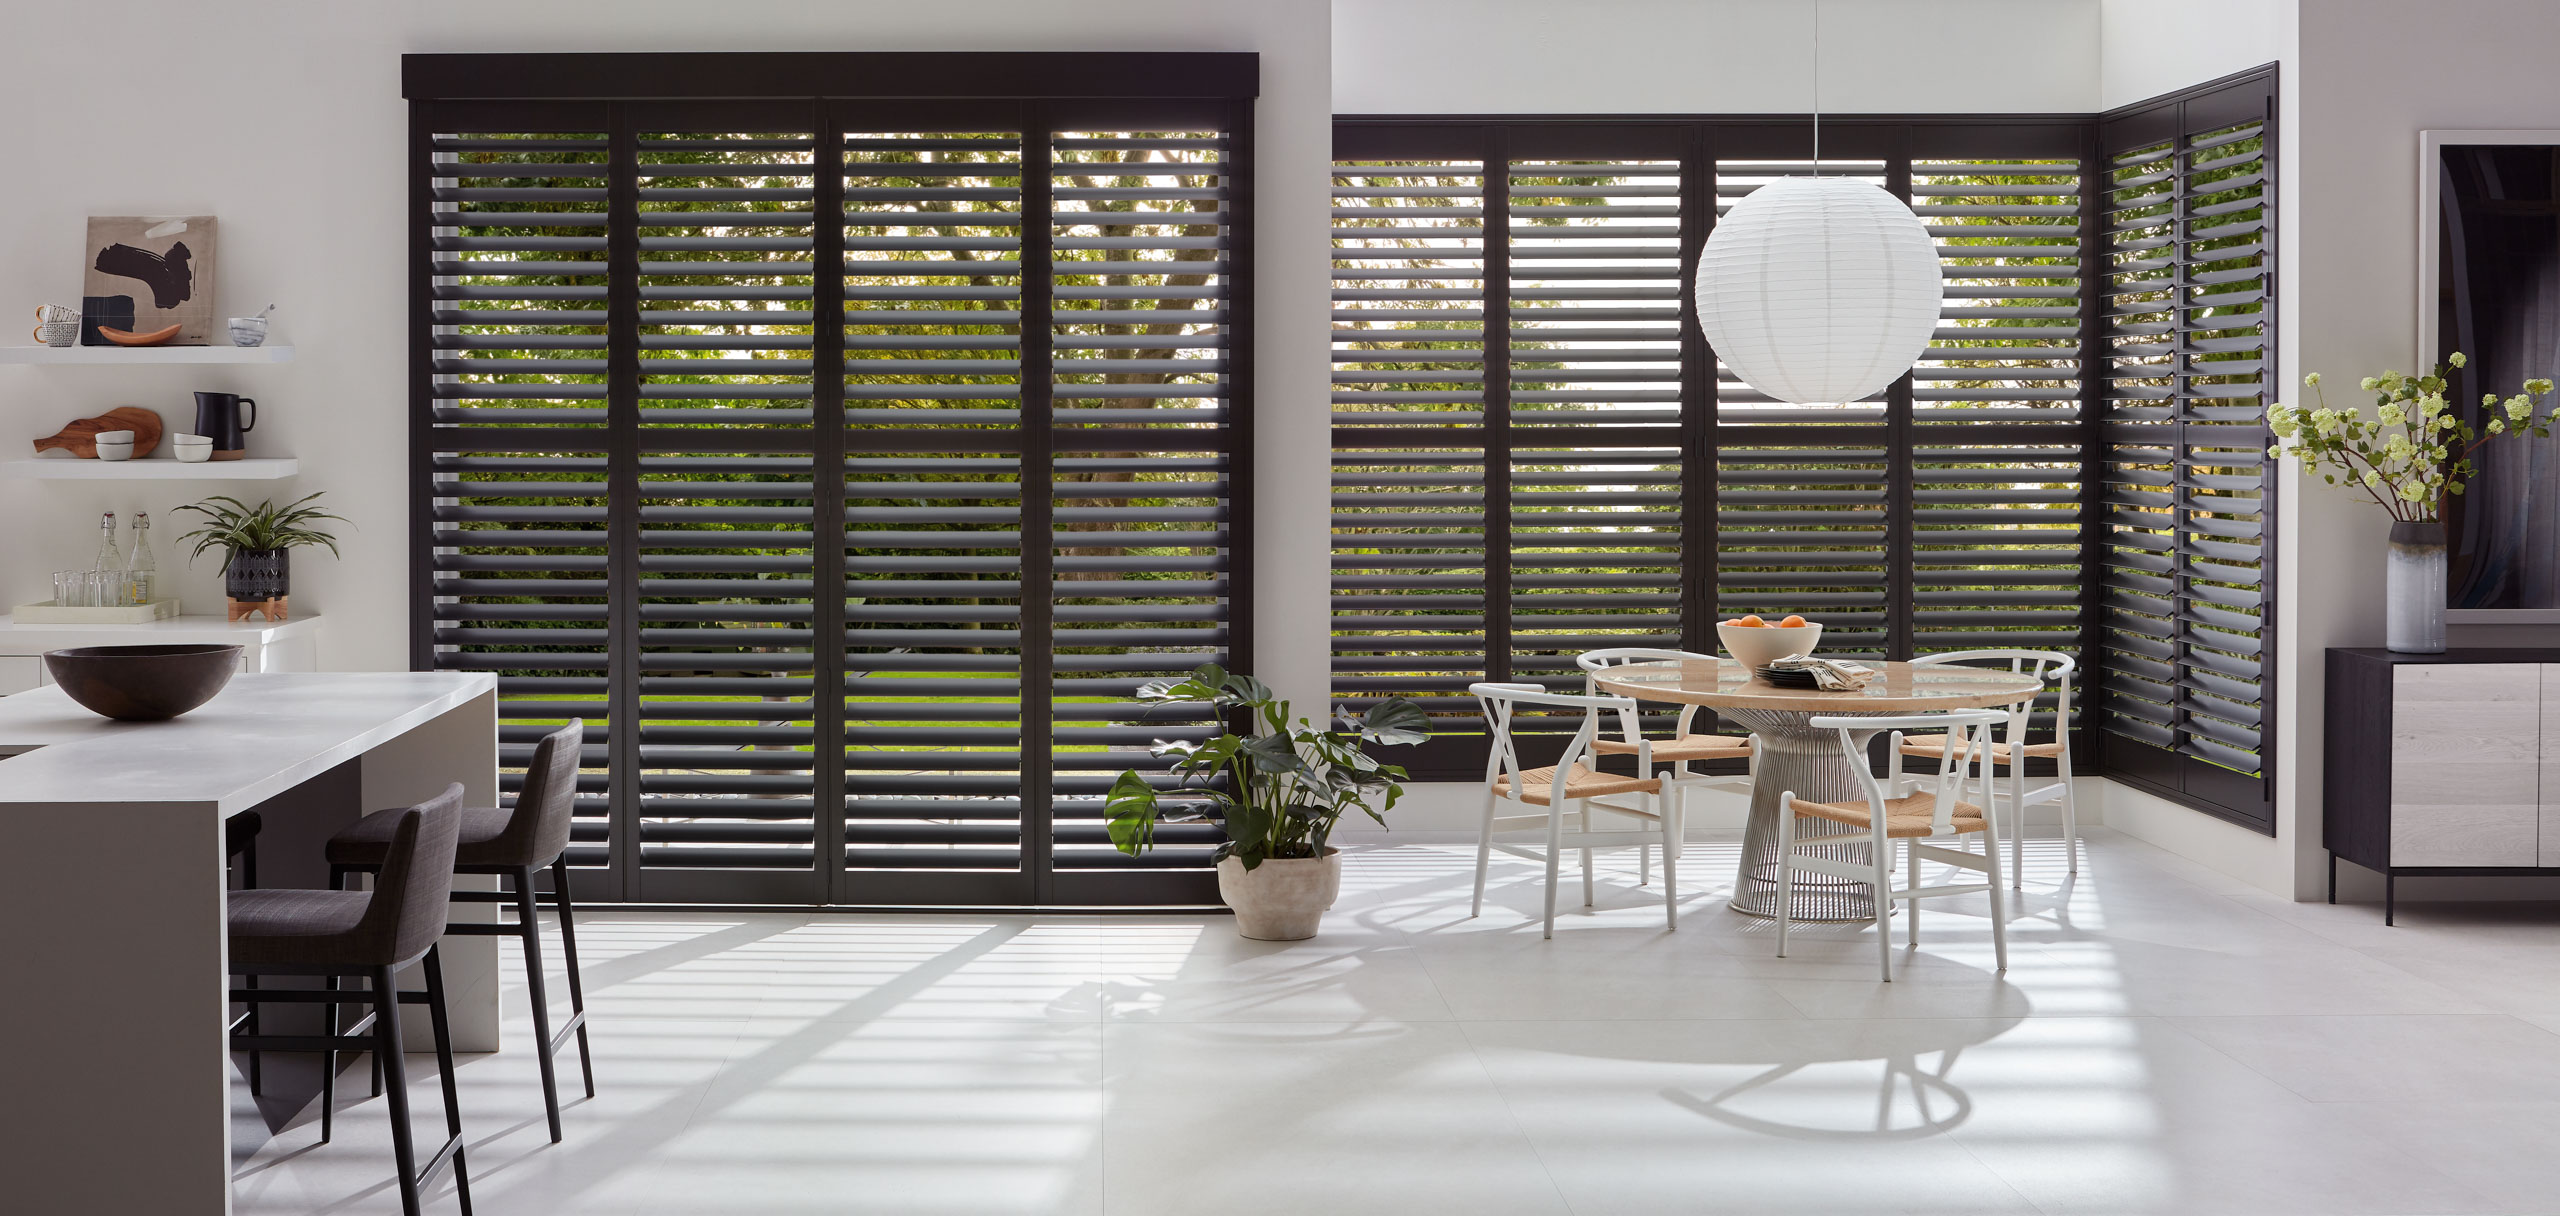 A kitchen with black shutters and a dining table. Hunter Douglas Heritance wood shutters add elegance to the room.